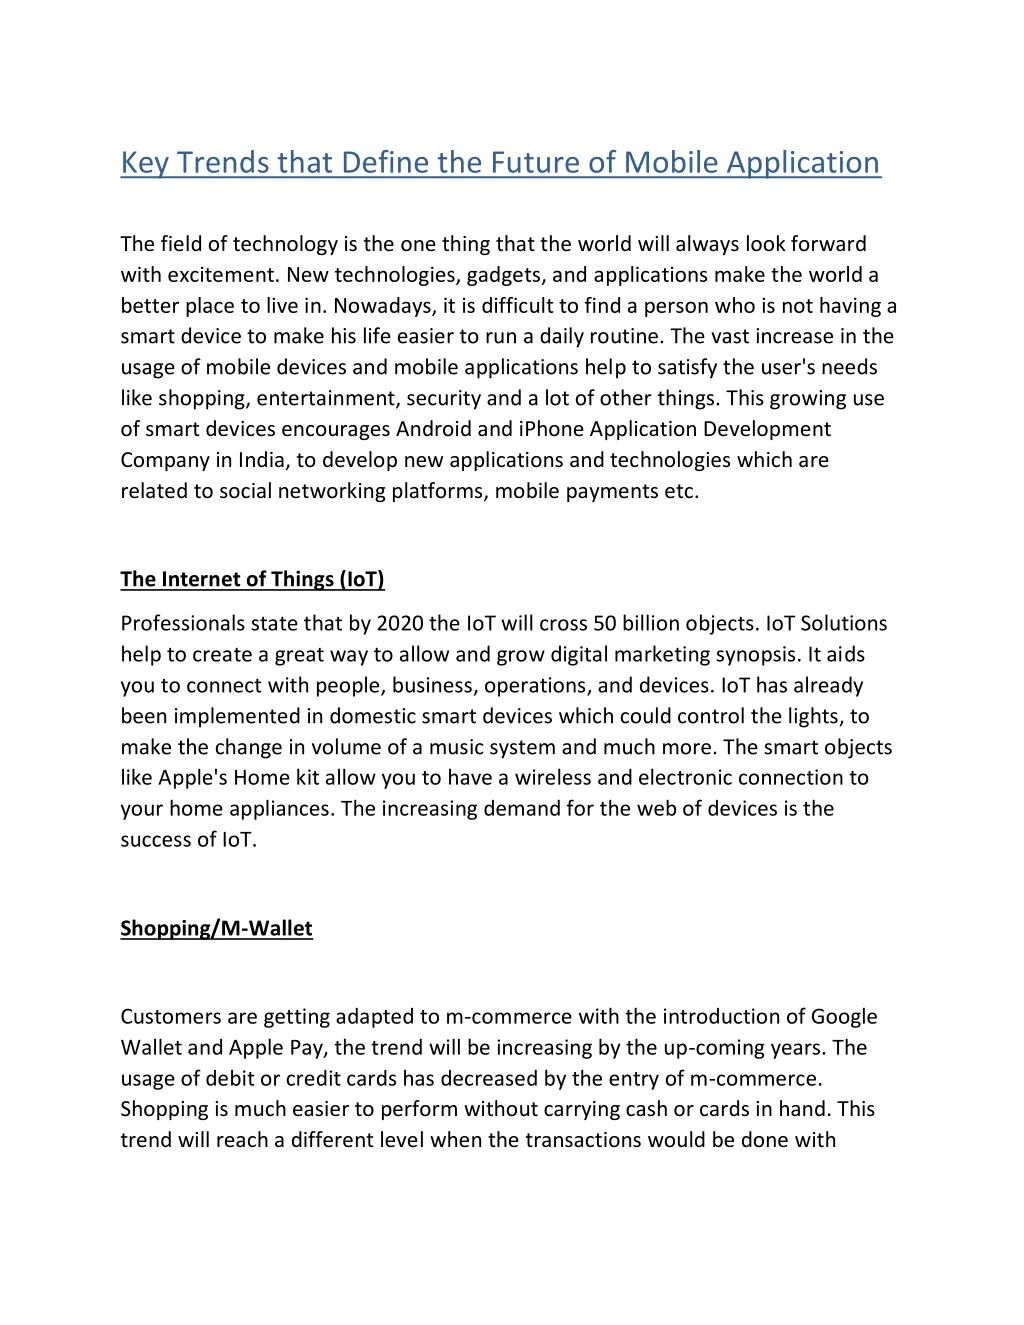 key trends that define the future of mobile